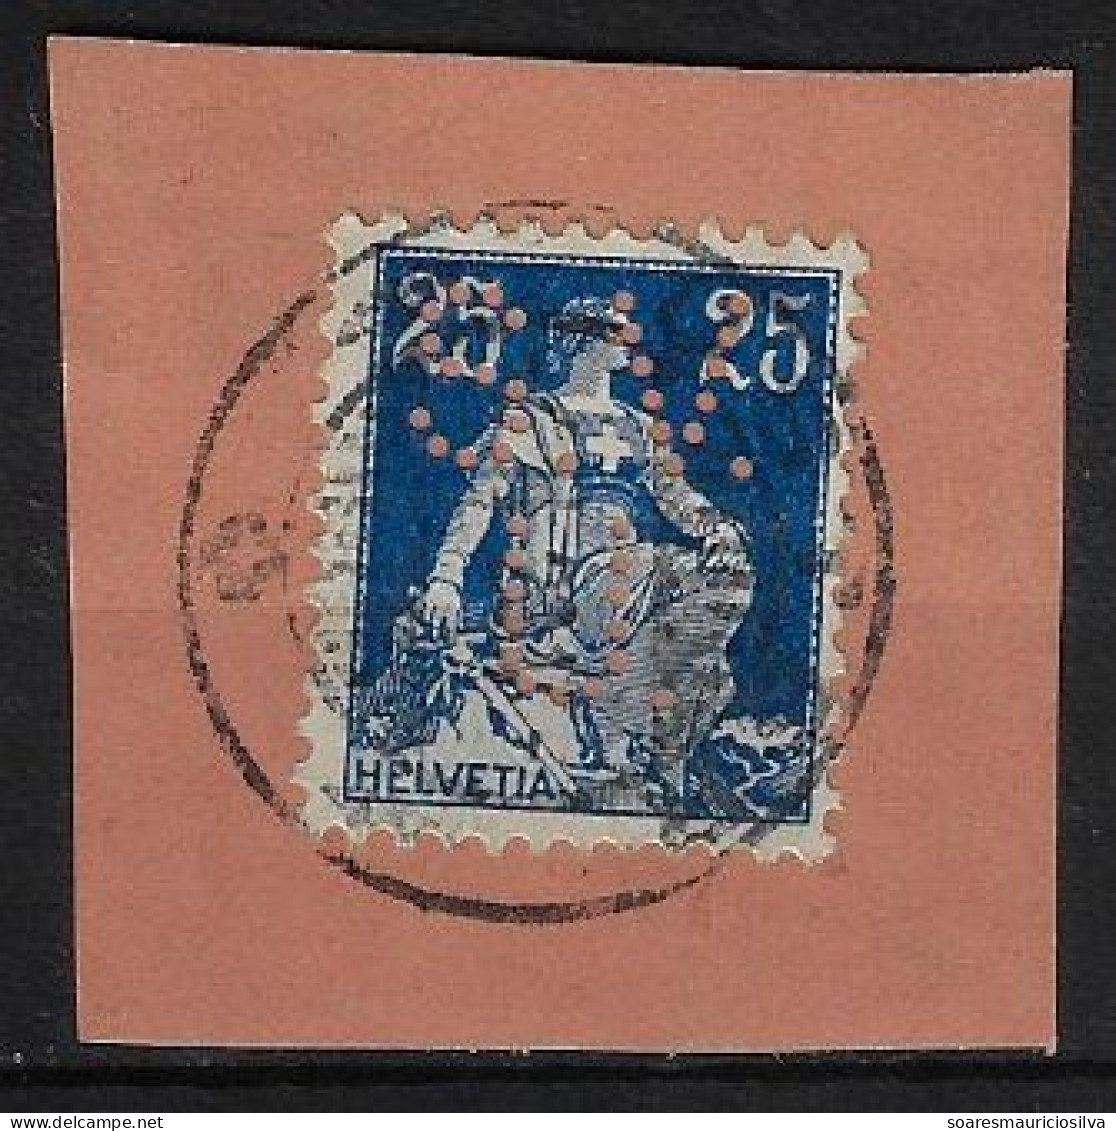 Switzerland 1904/1931 Cover Fragment Stamp With Perfin S.V./U. By Schweizerische Volksbank From Ulster Lochung Perfore - Perfins